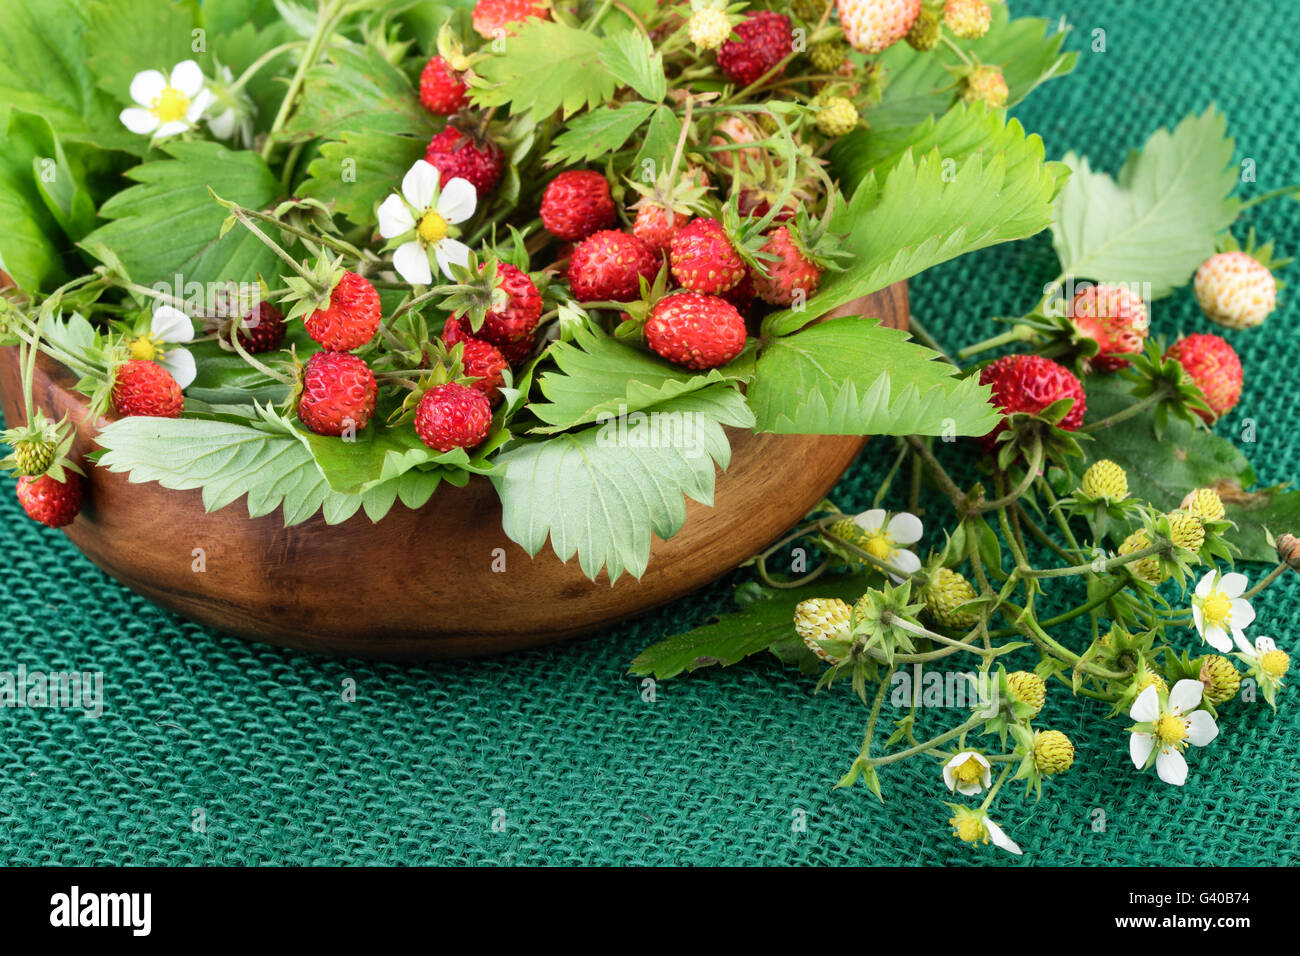 Wild strawberries on green jute fabric. Bowl with woodland strawberries on rustic background. Stock Photo